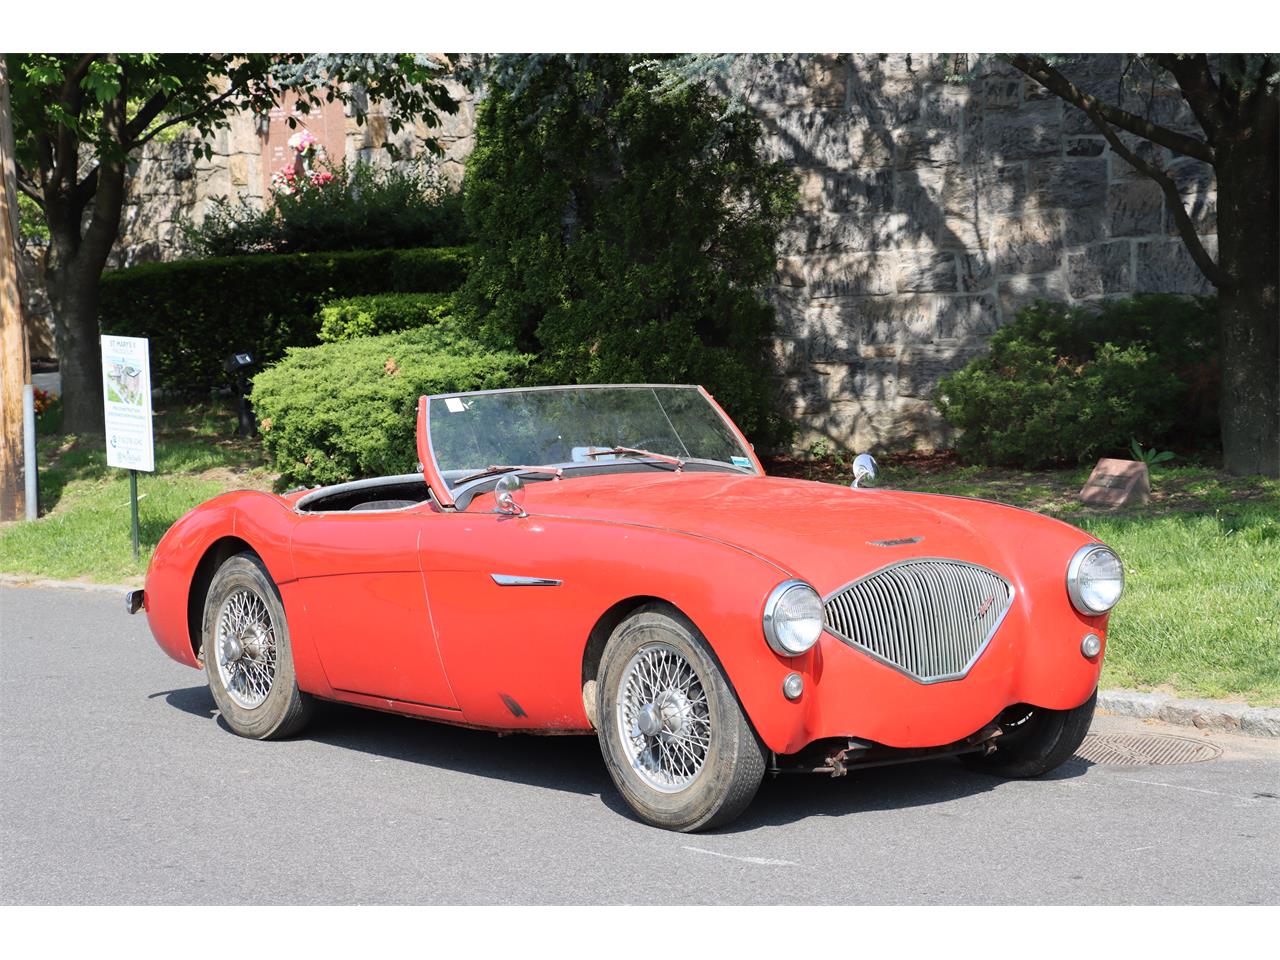 For Sale: 1960 Austin-Healey 100-4 in Astoria, New York for sale in Astoria, NY